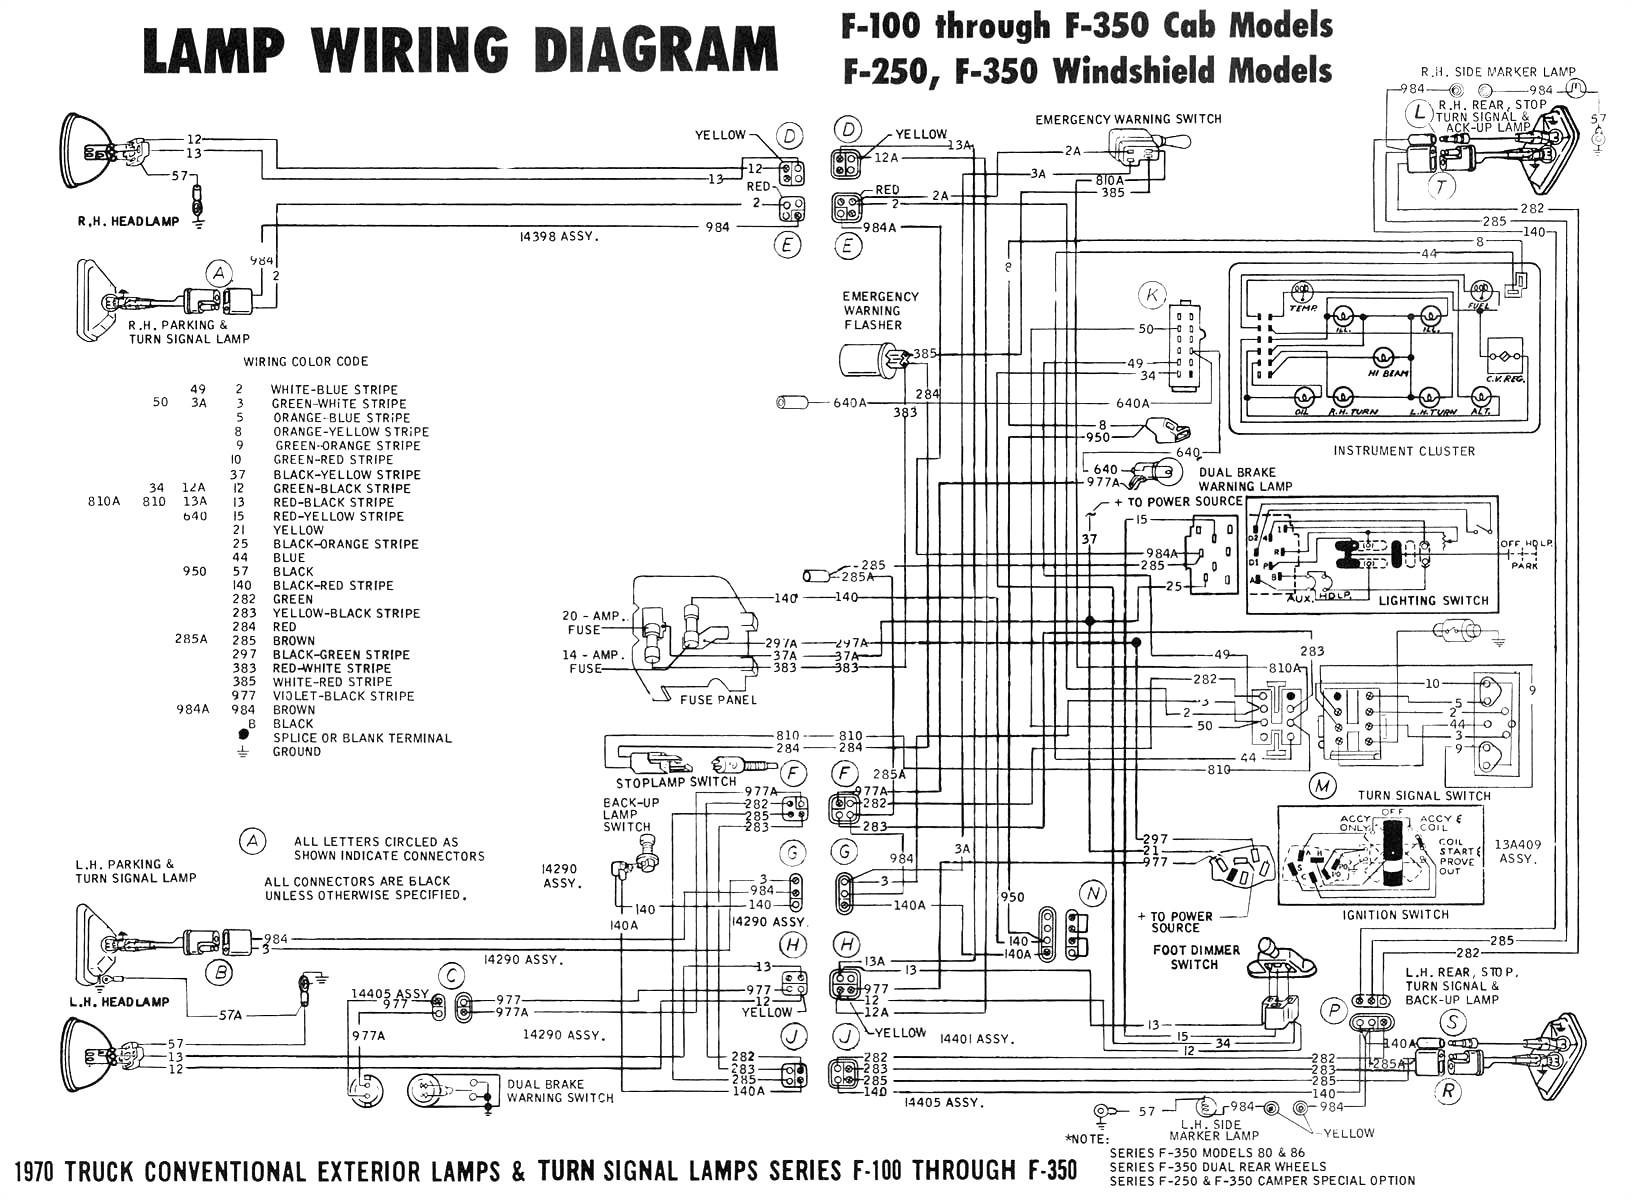 truck junction box wiring diagram wiring diagrams recent wiring diagrams for lighting circuits e2 80 93 junction box method